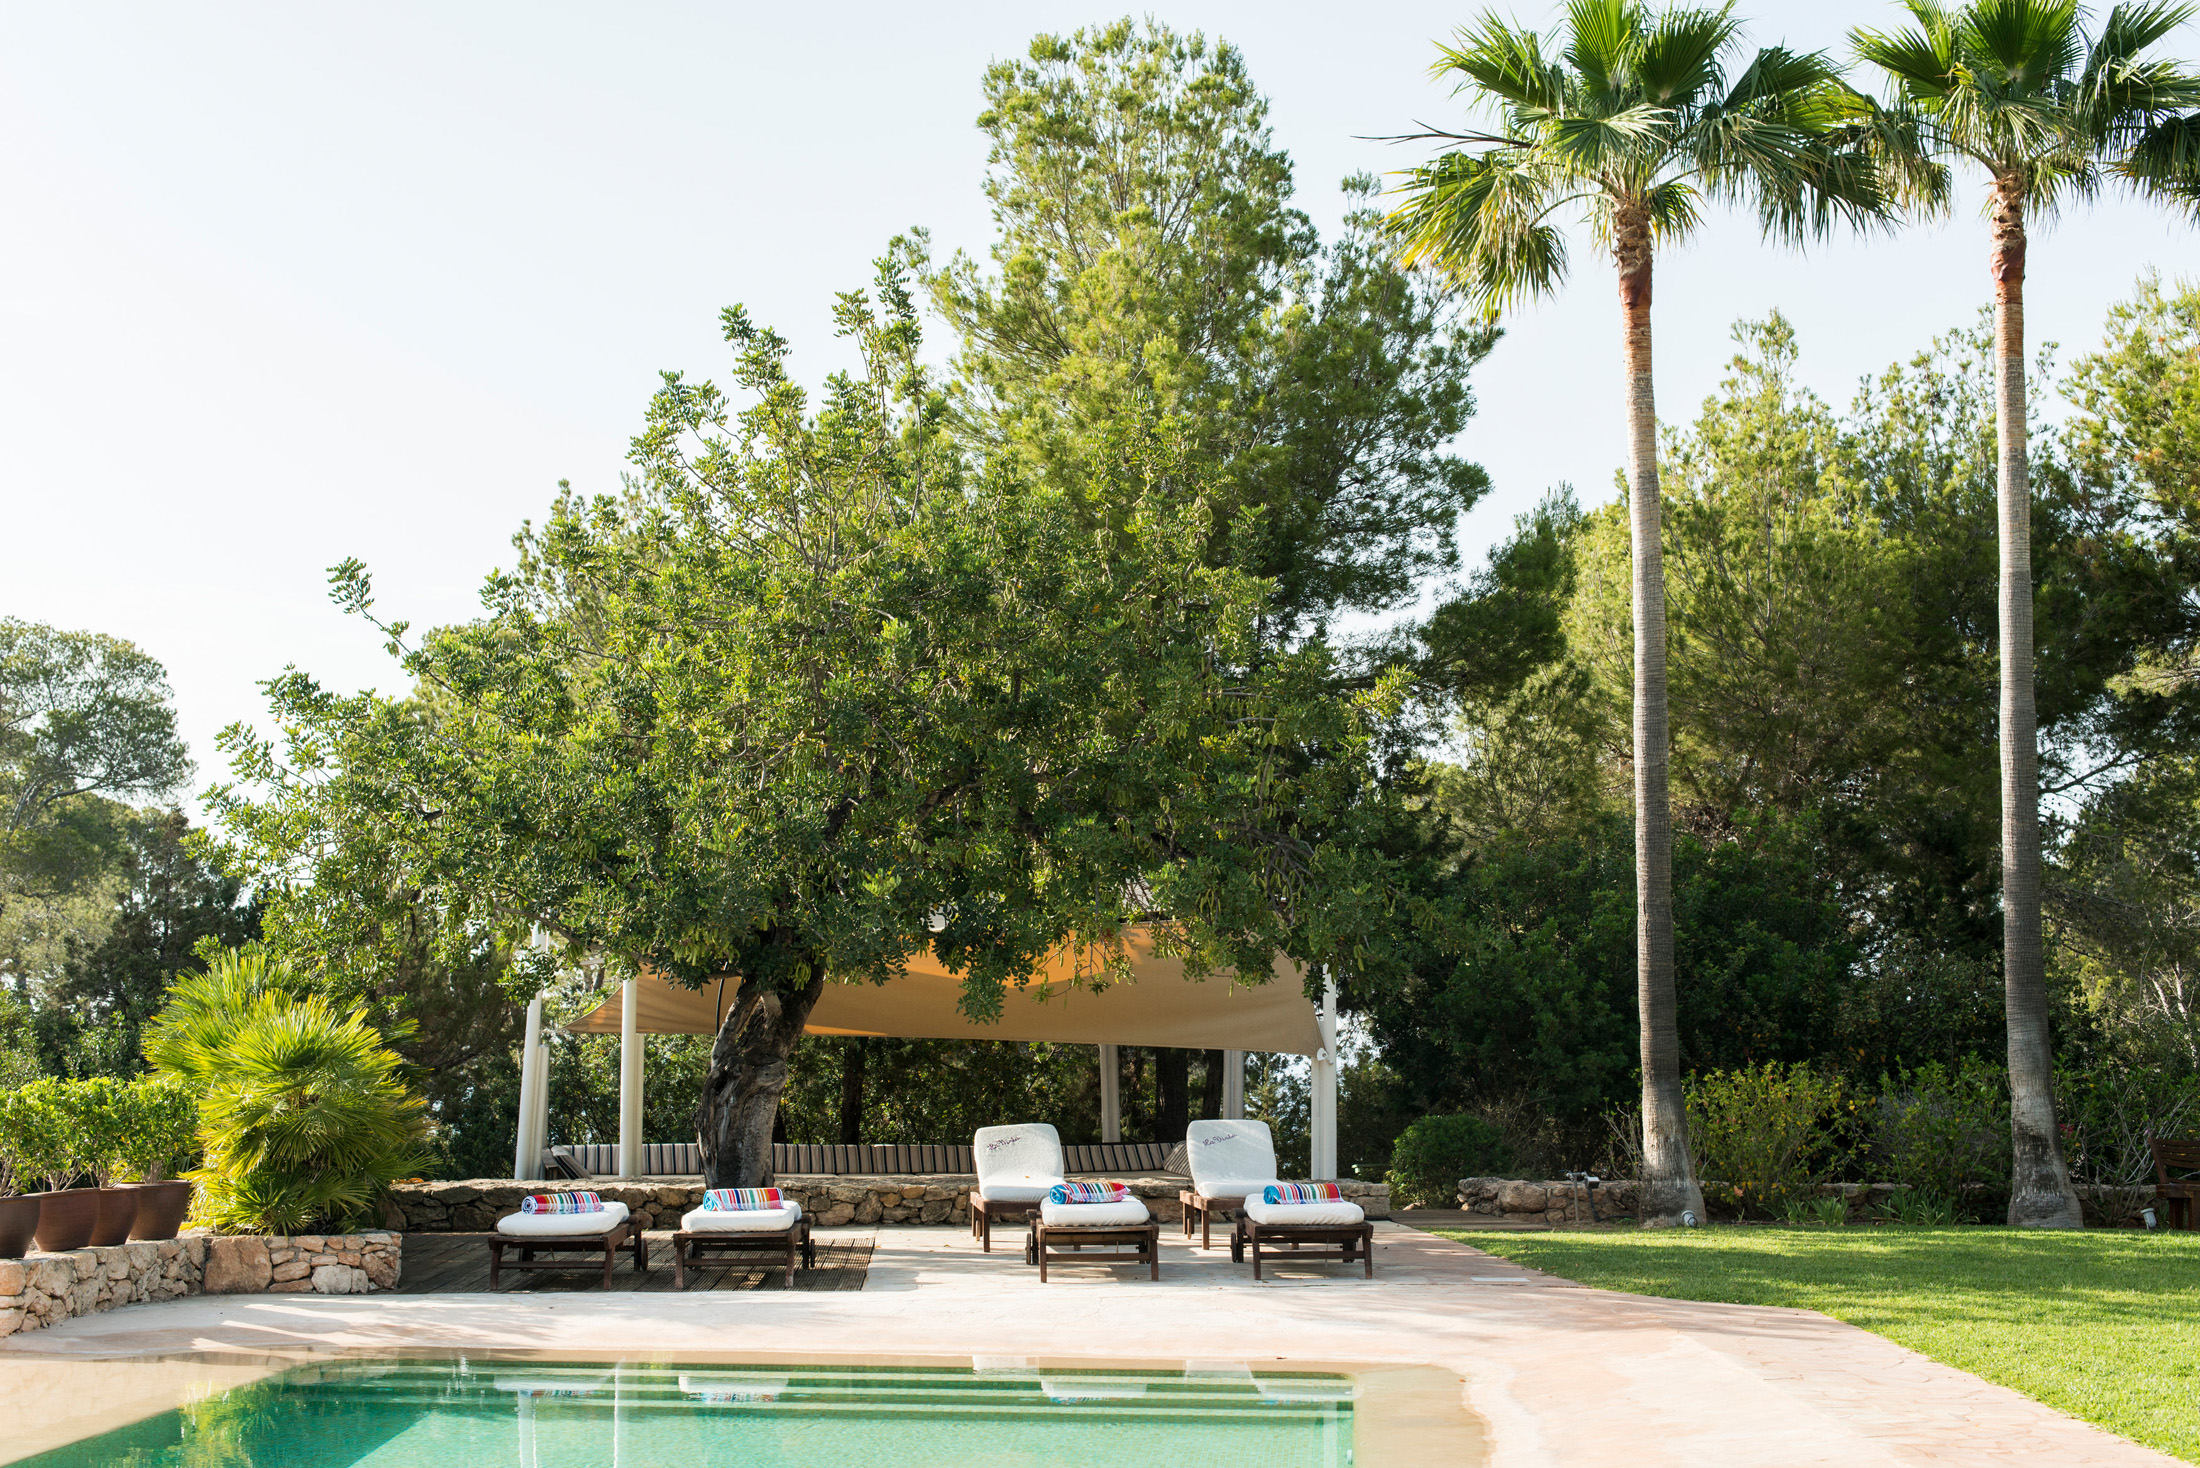 Pool and gardens of a luxury villa on Ibiza